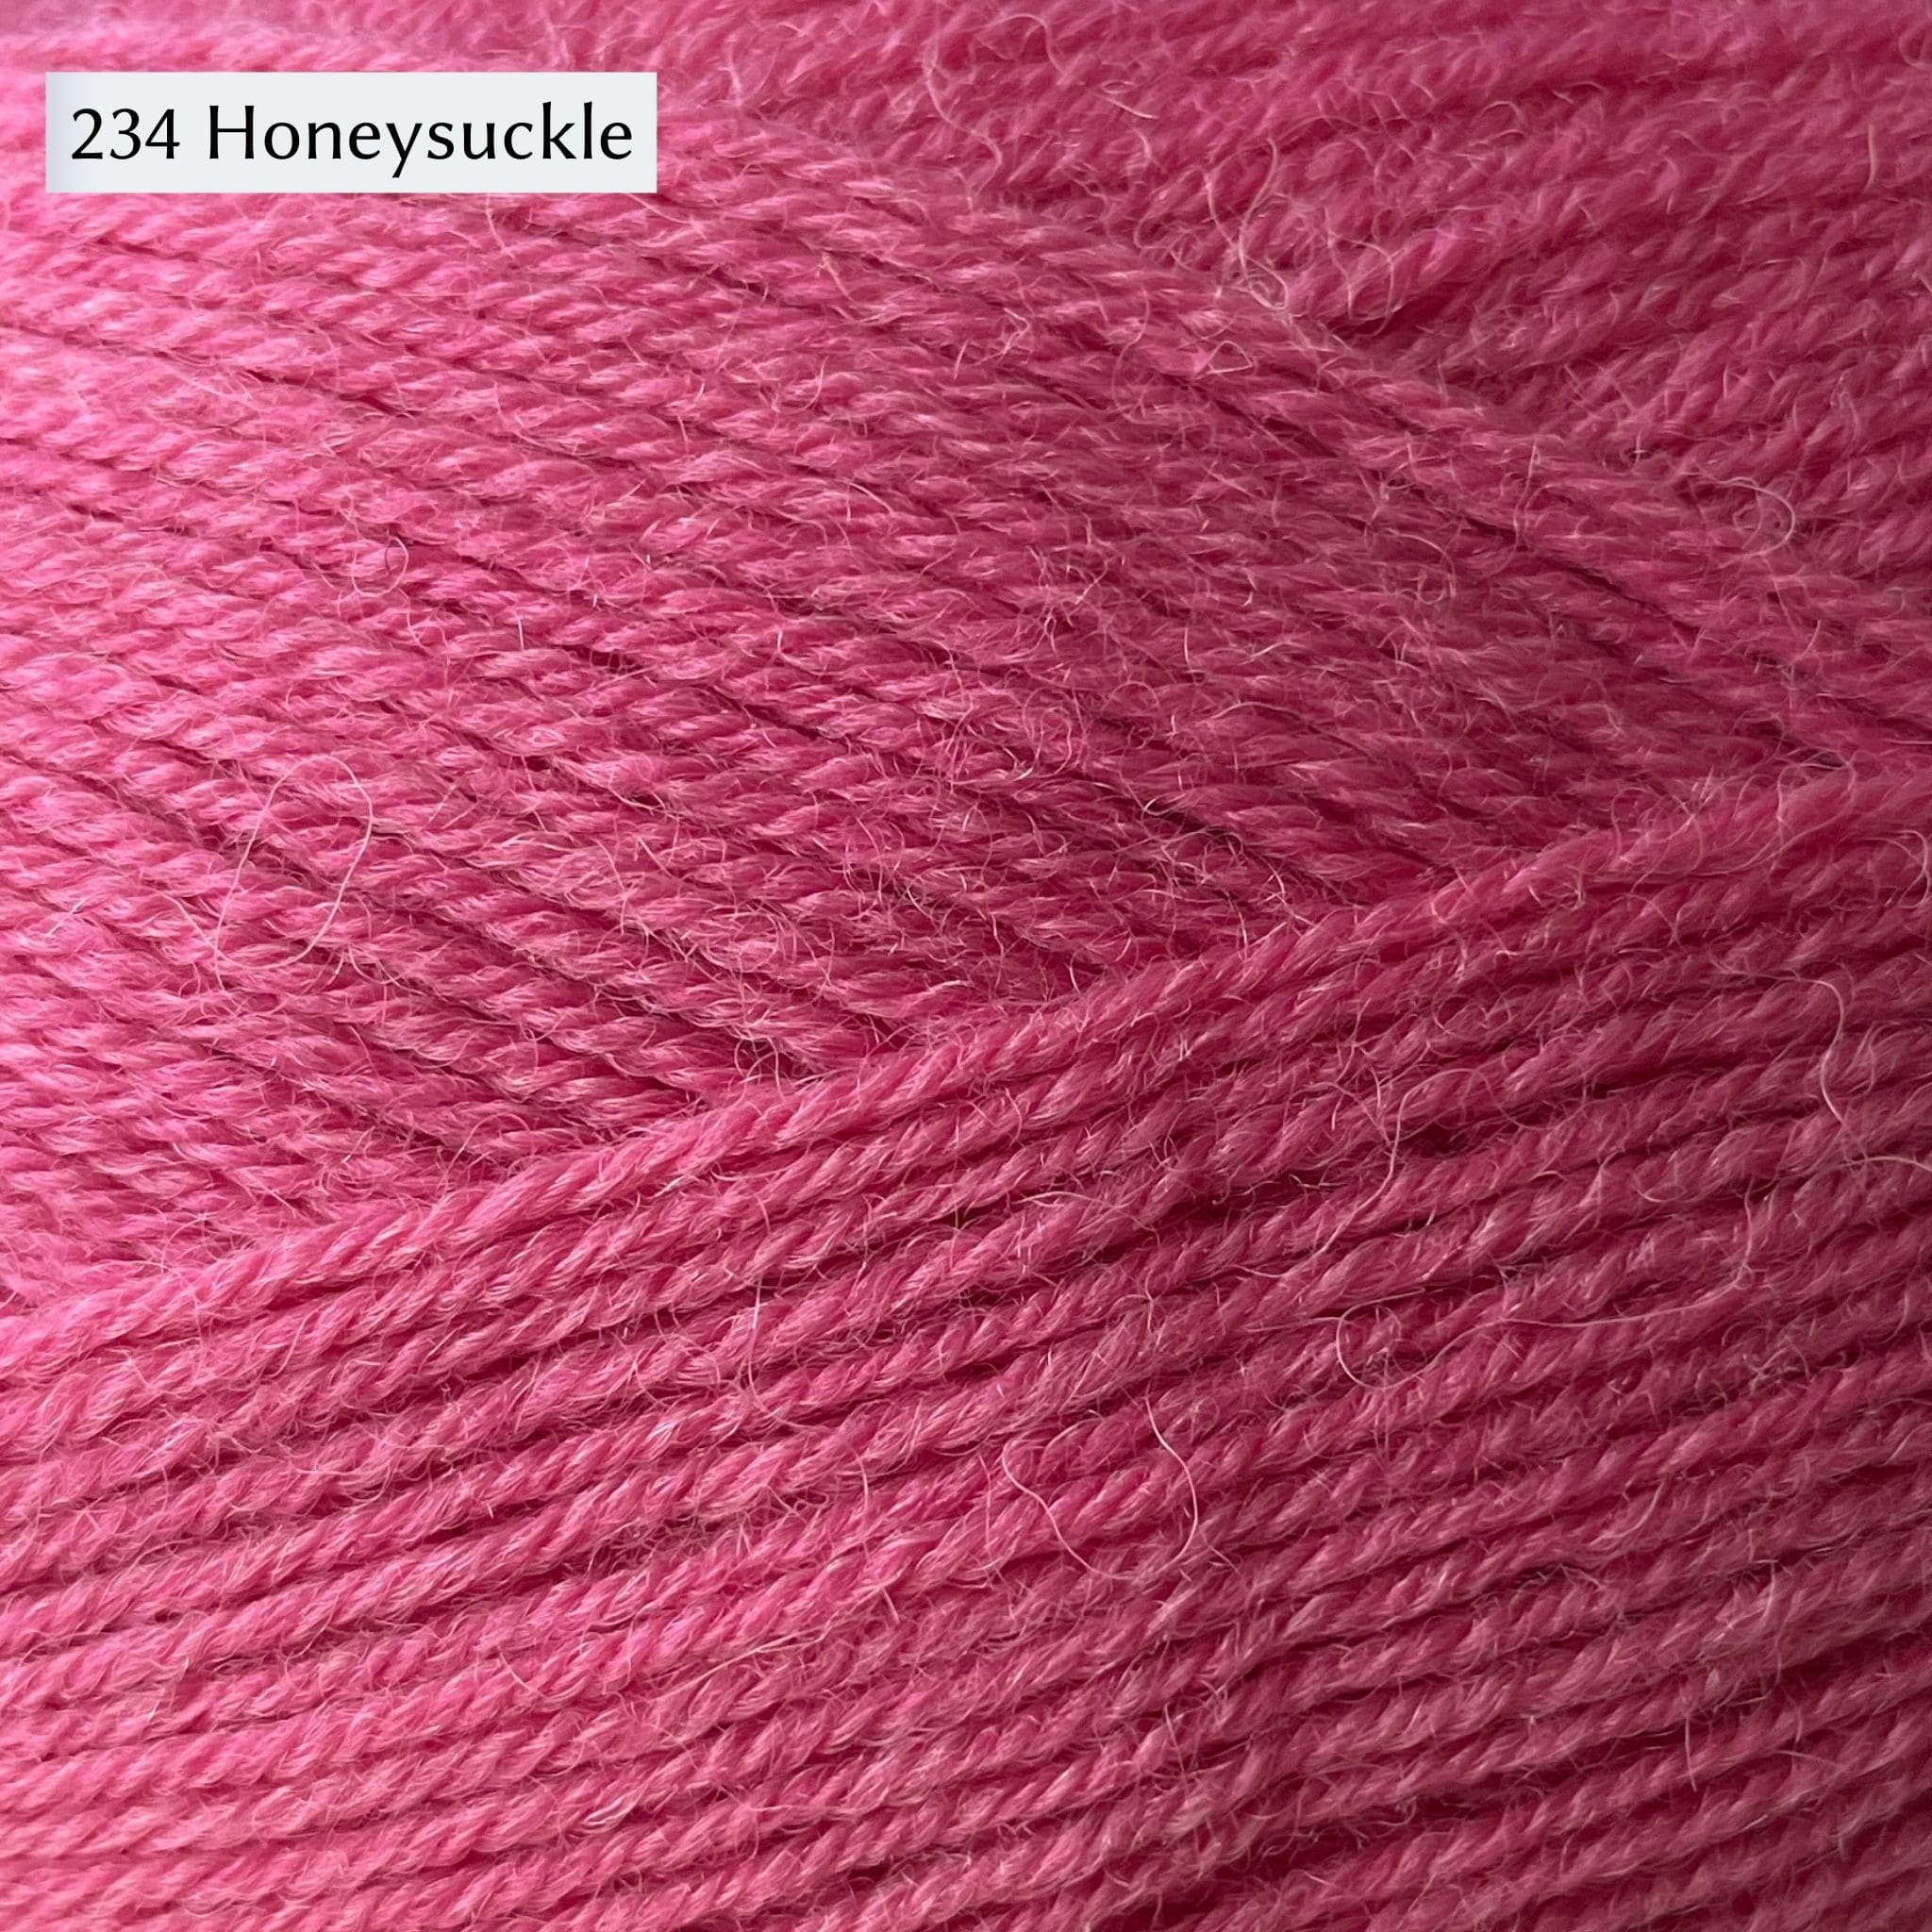 West Yorkshire Spinners Signature 4ply yarn, 100-gram ball, fingering weight, in color 234 Honeysuckle, a medium bubblegum pink